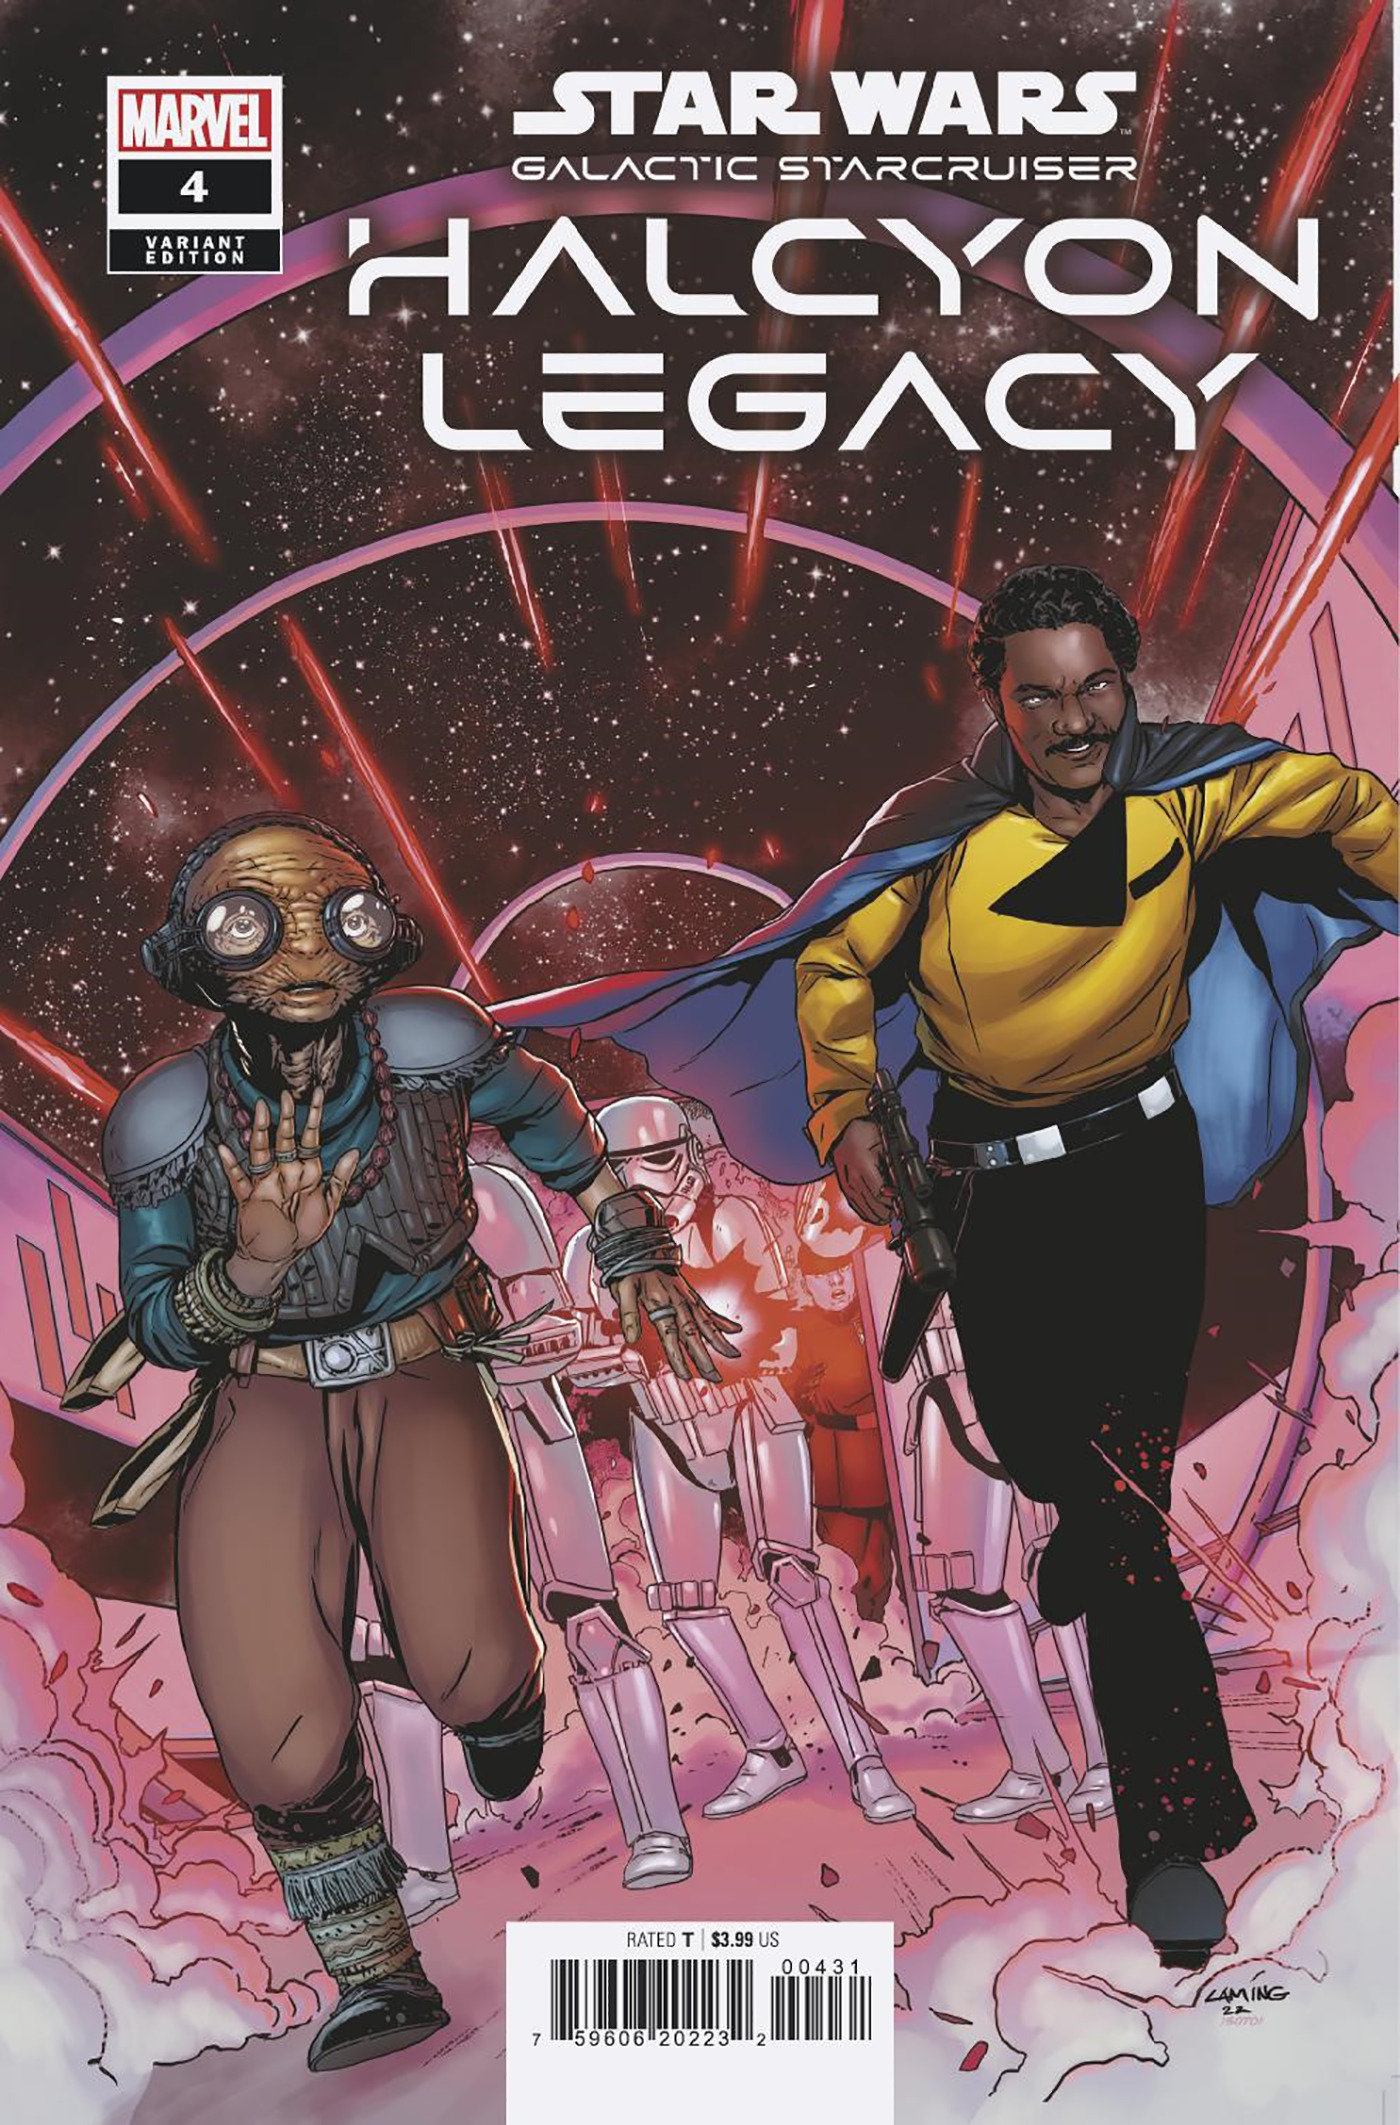 Galactic Starcruiser: Halcyon Legacy #4 (Marc Laming Variant Cover) (06.07.2022)